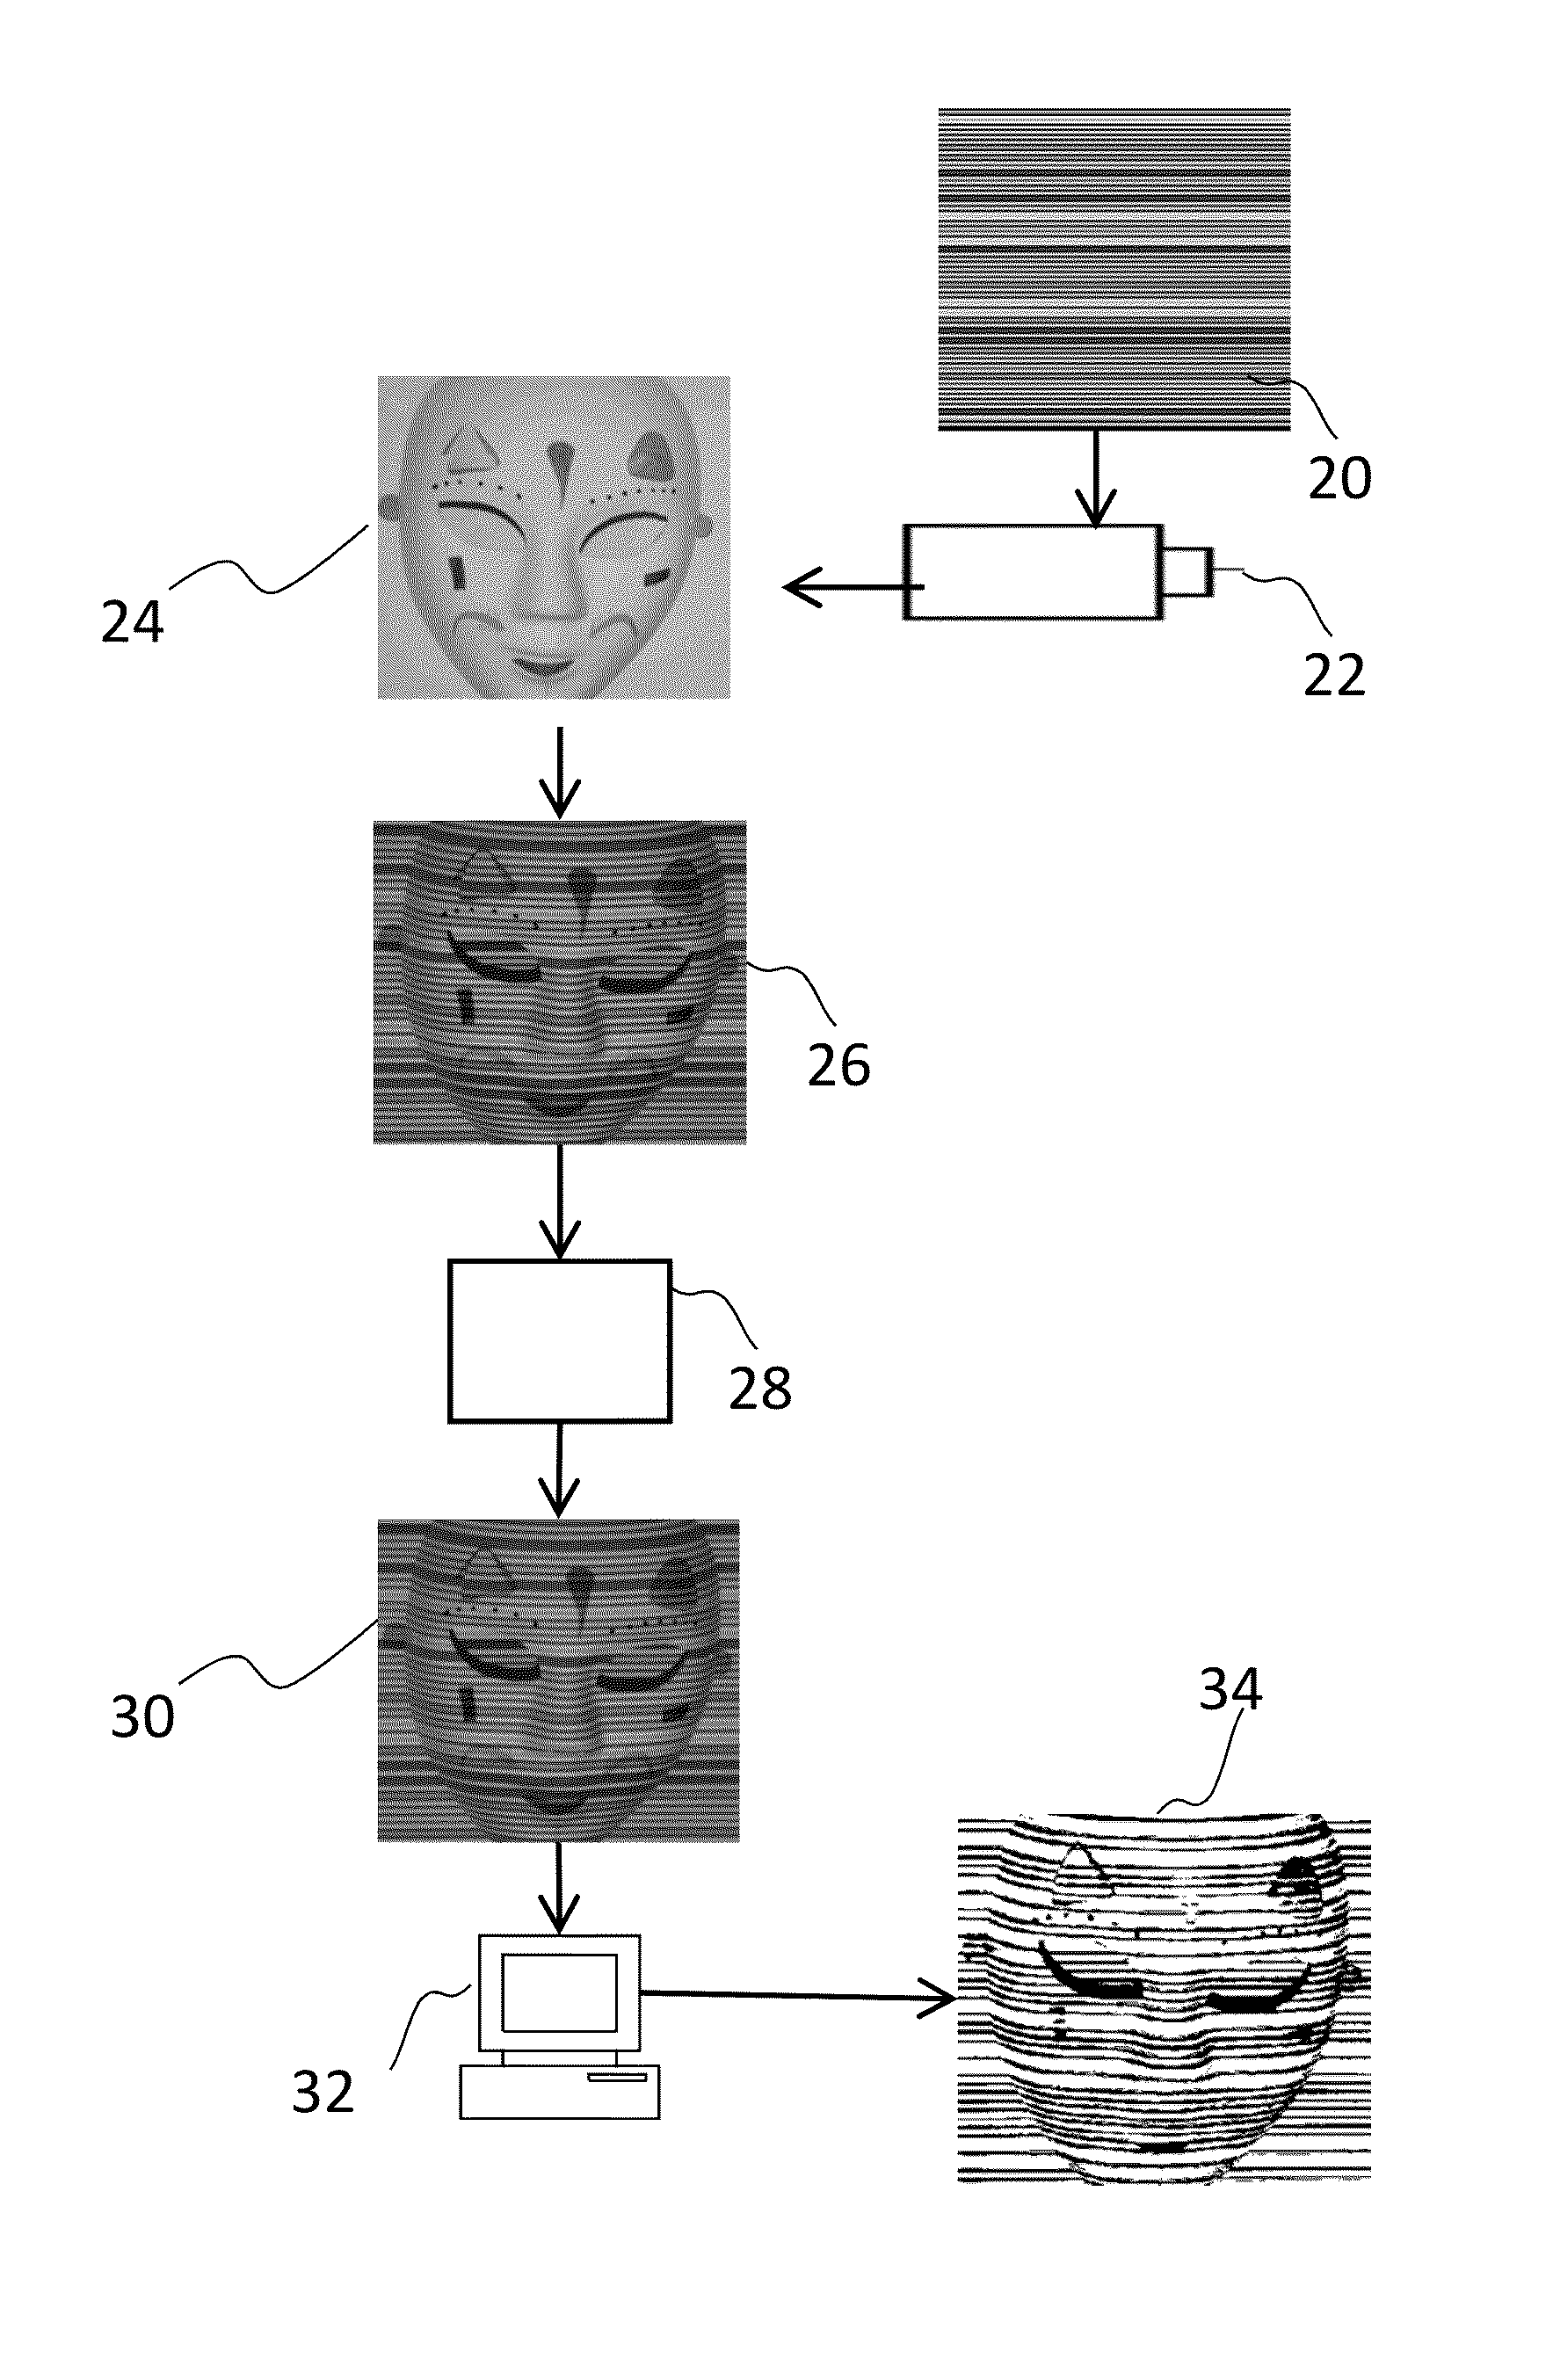 Method and System for Rapid Three-Dimensional Shape Measurement